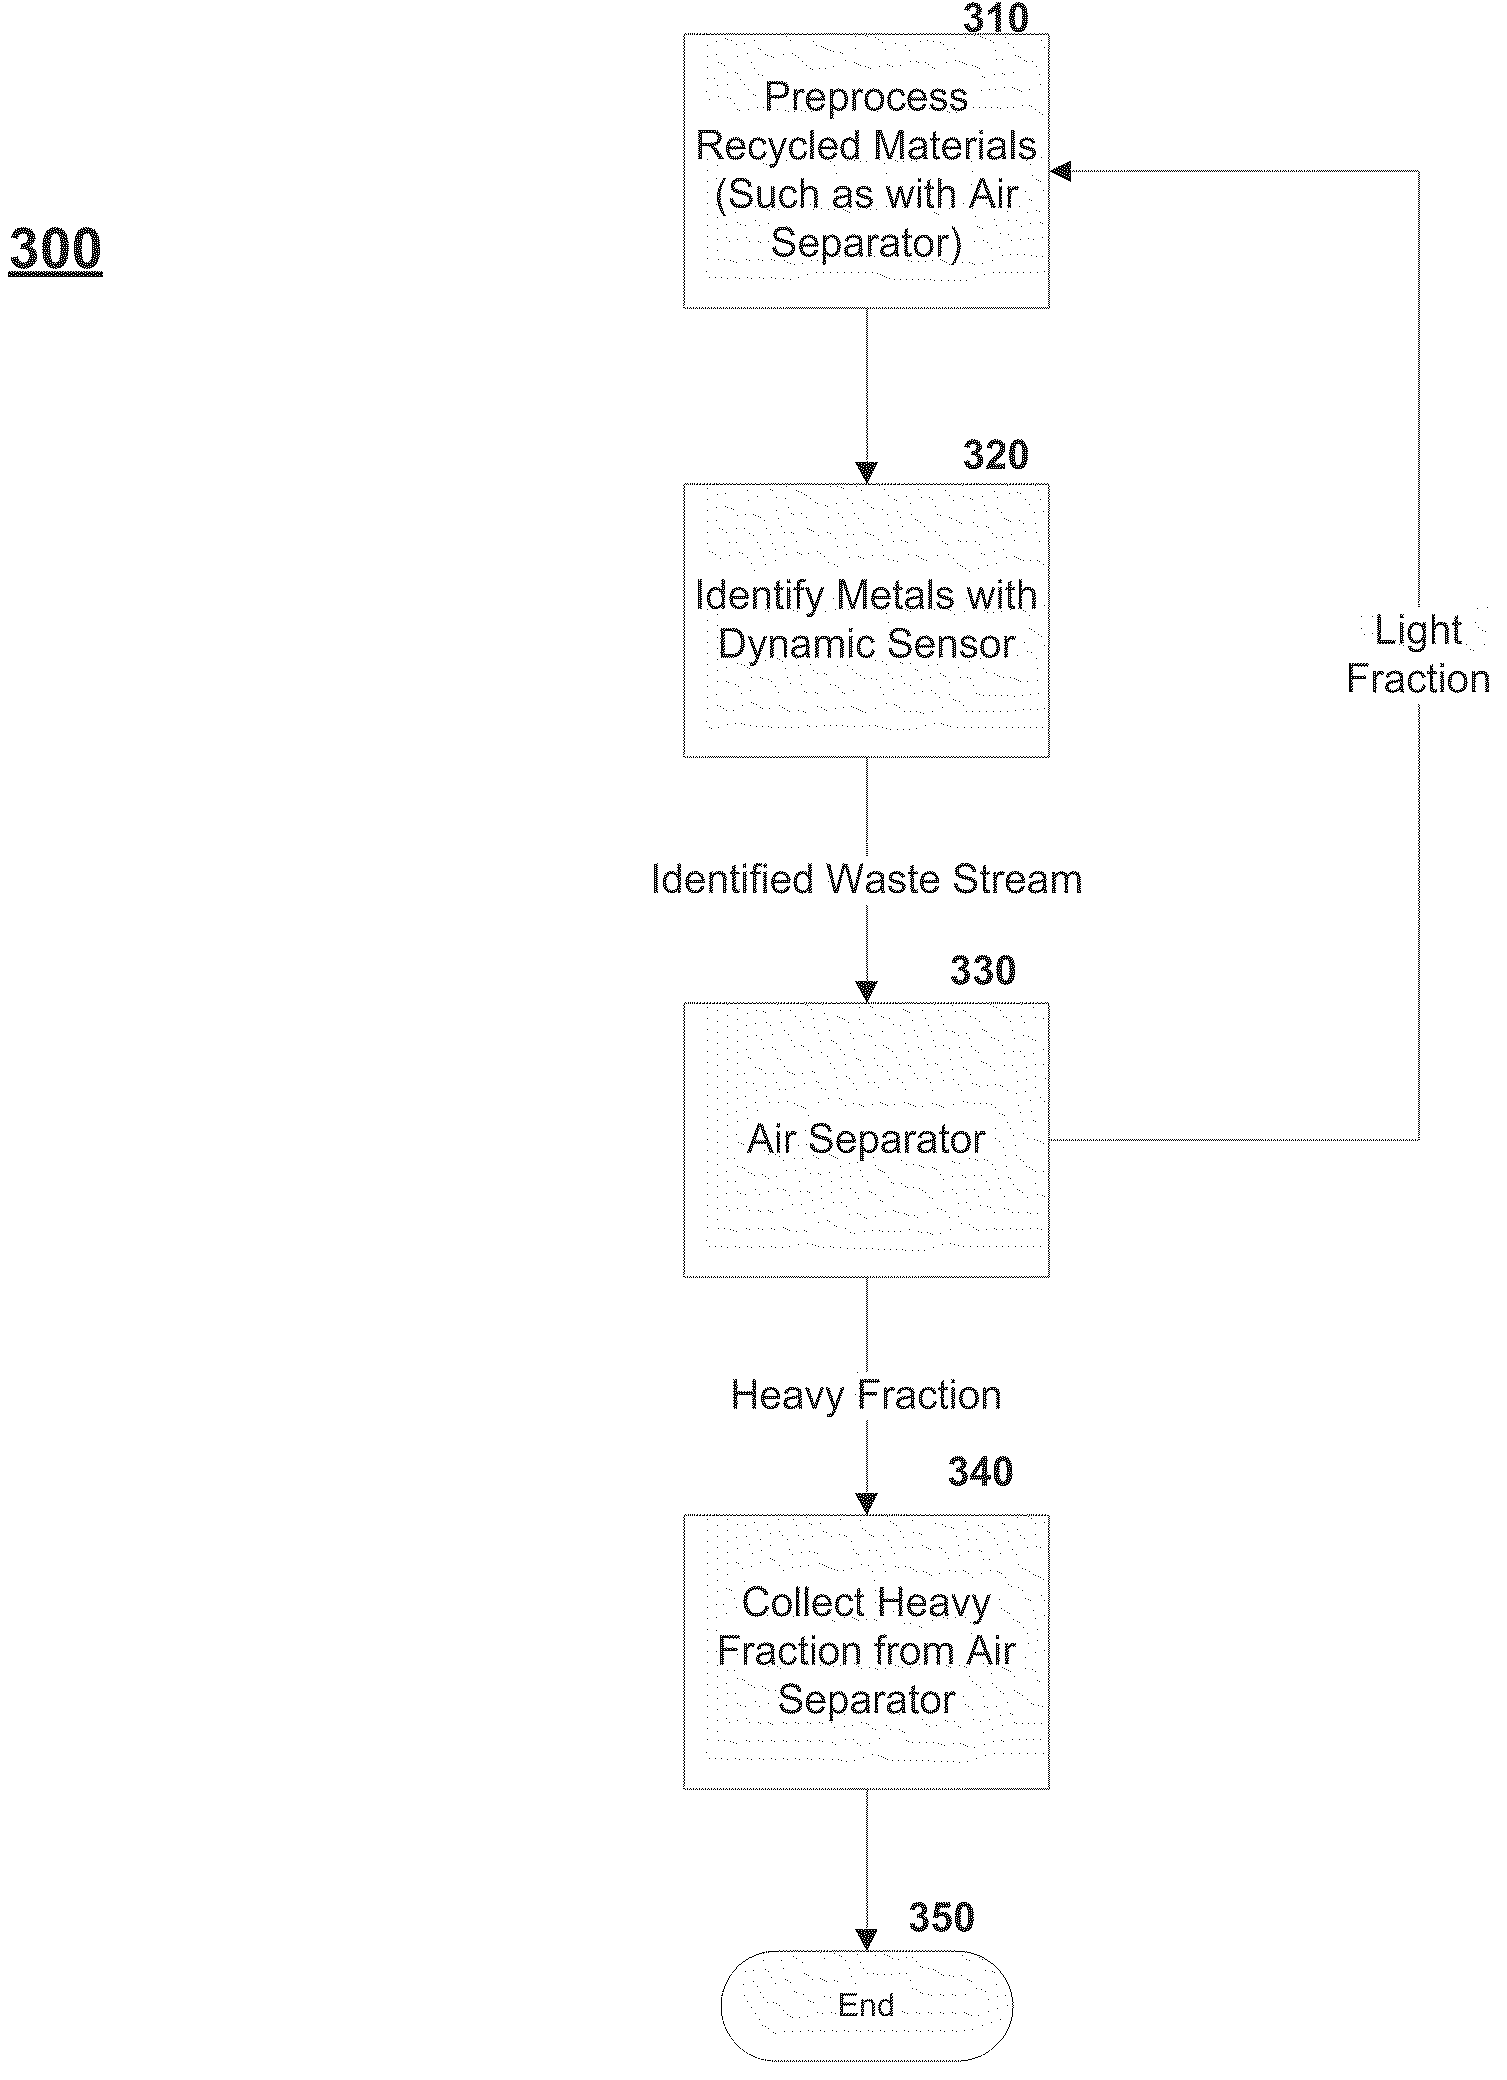 Method and system for recovering metal from processed recycled materials